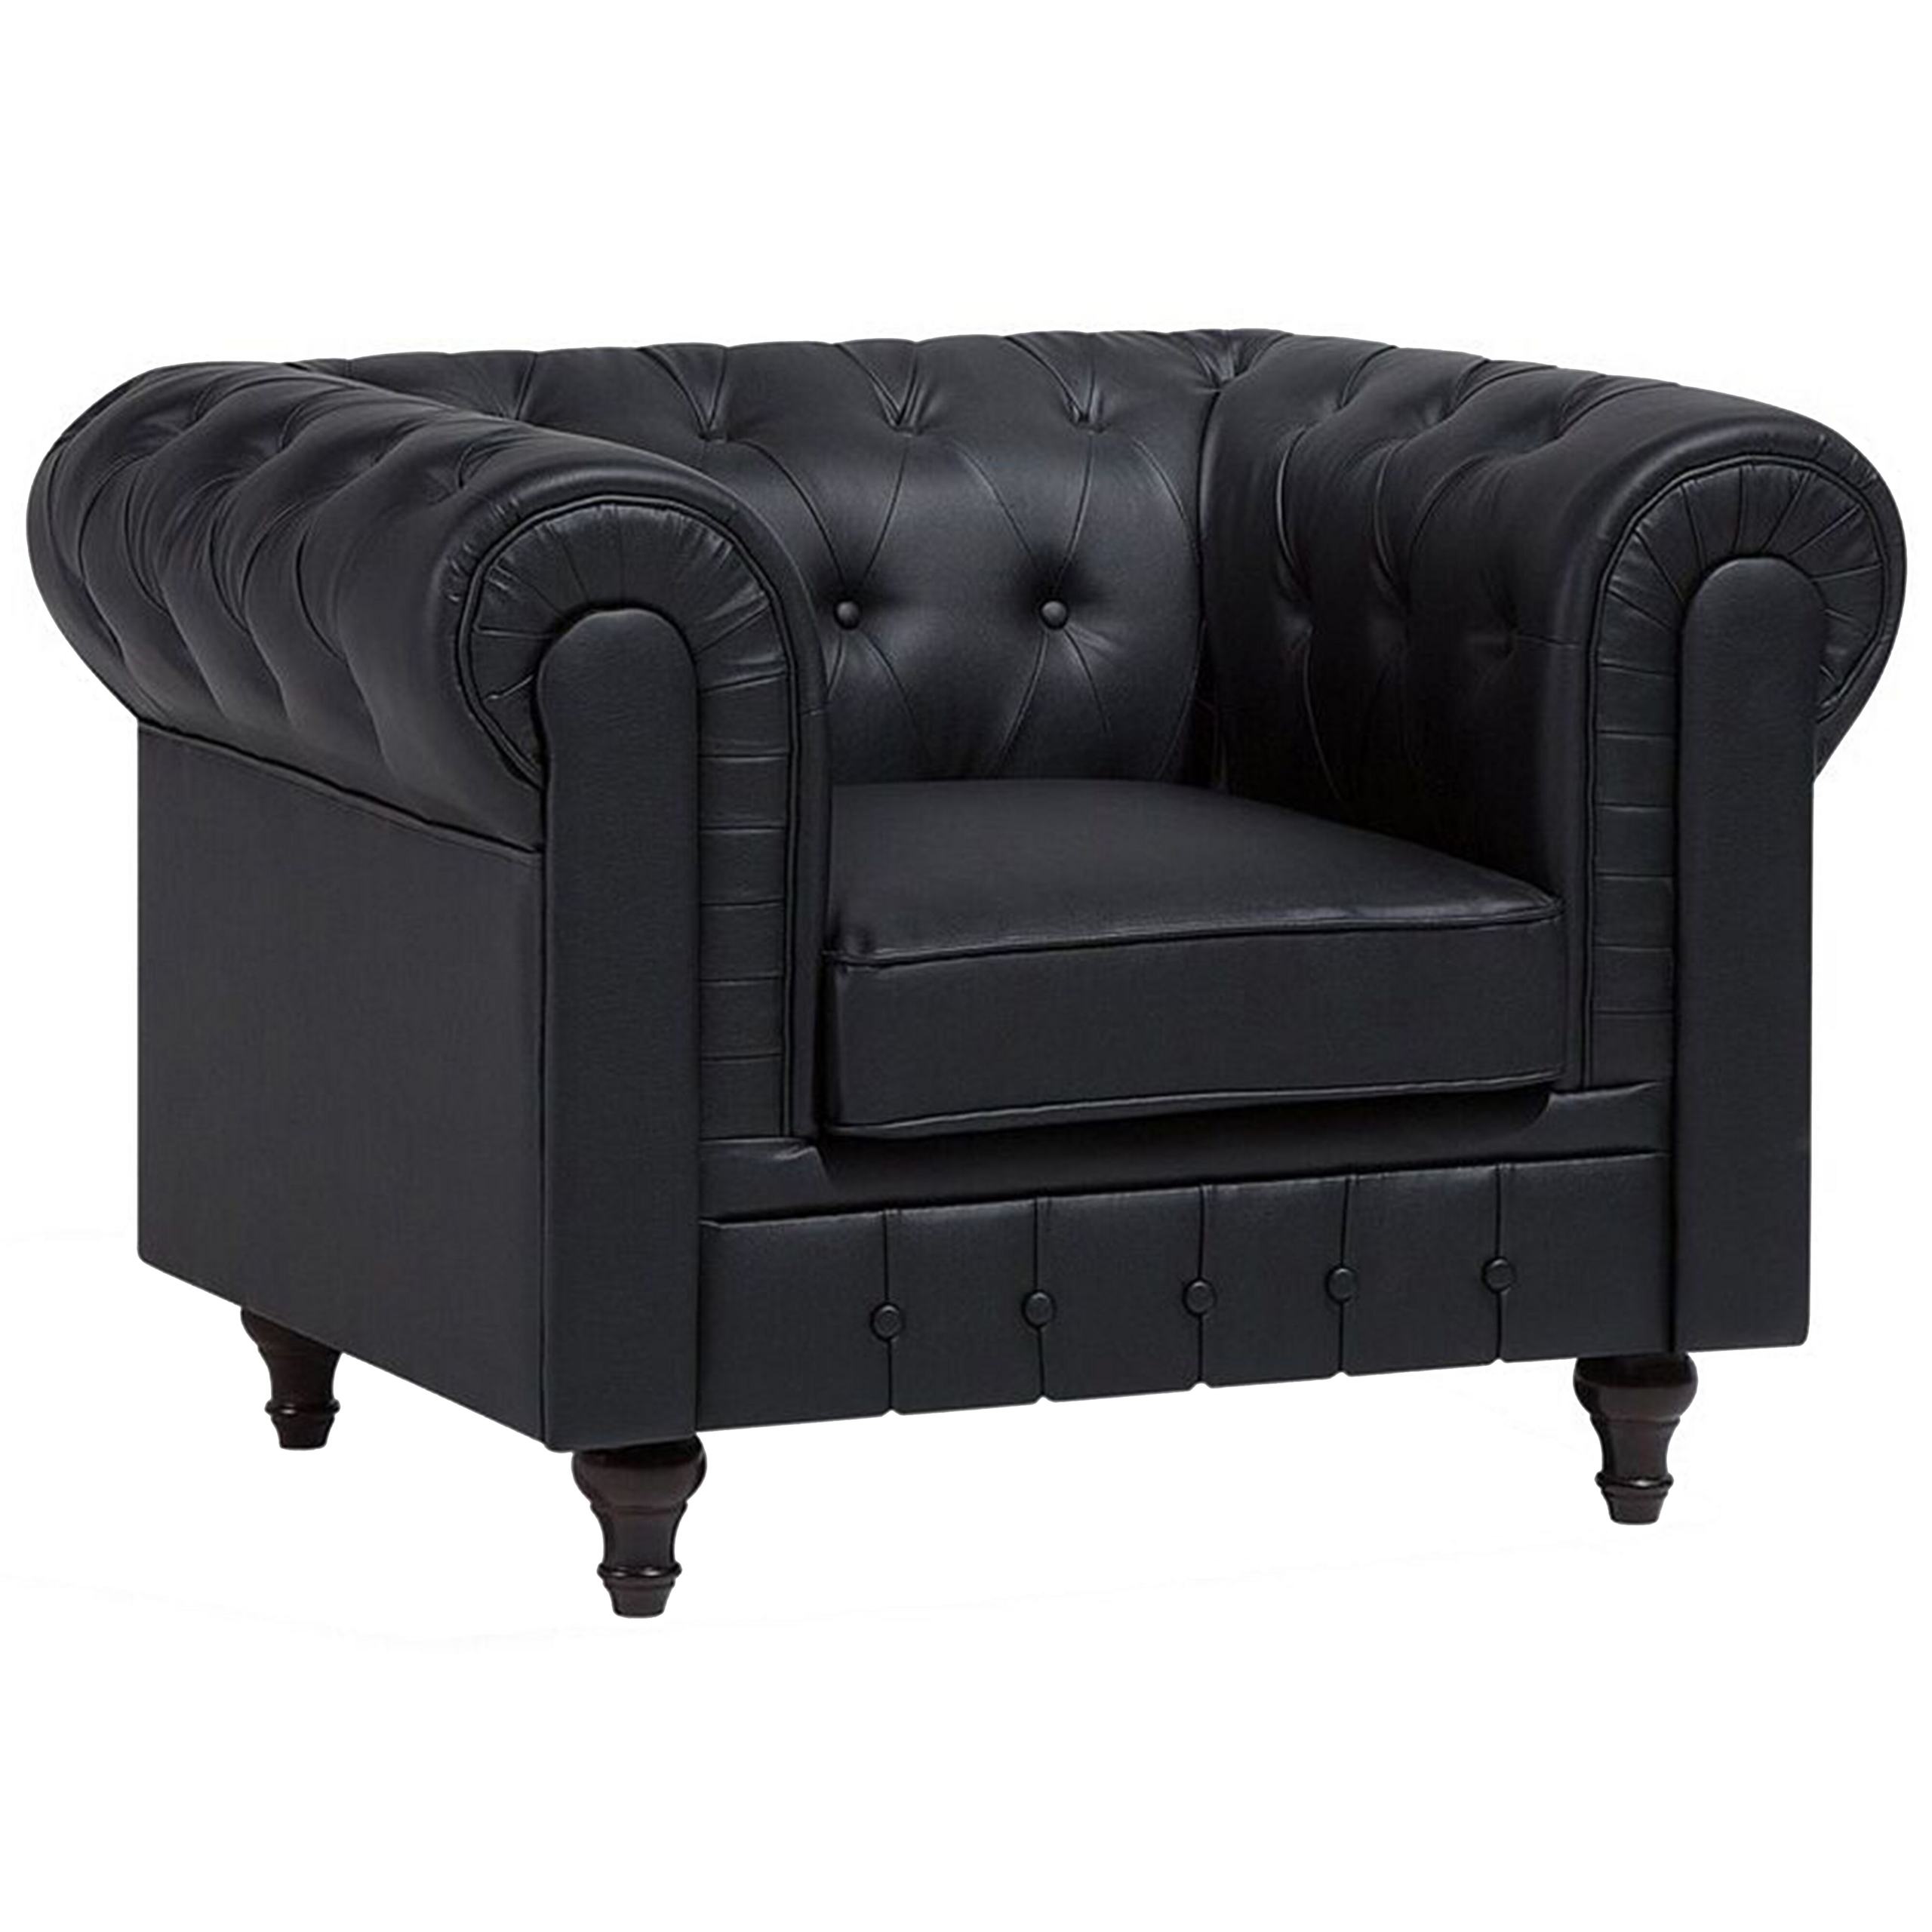 Beliani Chesterfield Armchair Black Faux Leather Upholstery Dark Wood Legs Contemporary